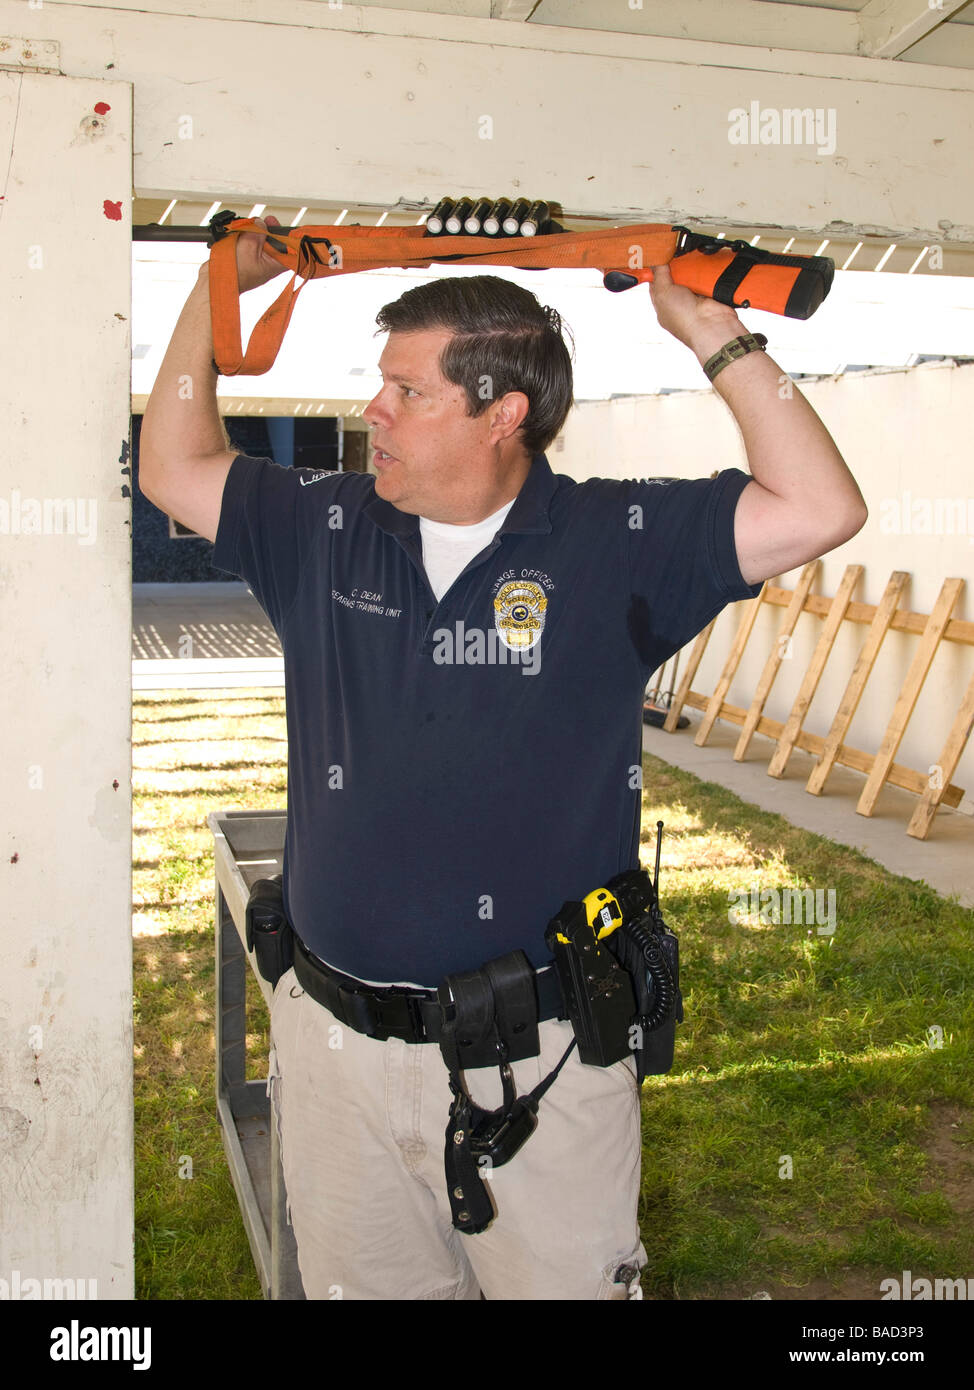 Range officeer demonstrates non lethal beanbag shotgun to the members of  the citizen police academy Stock Photo - Alamy